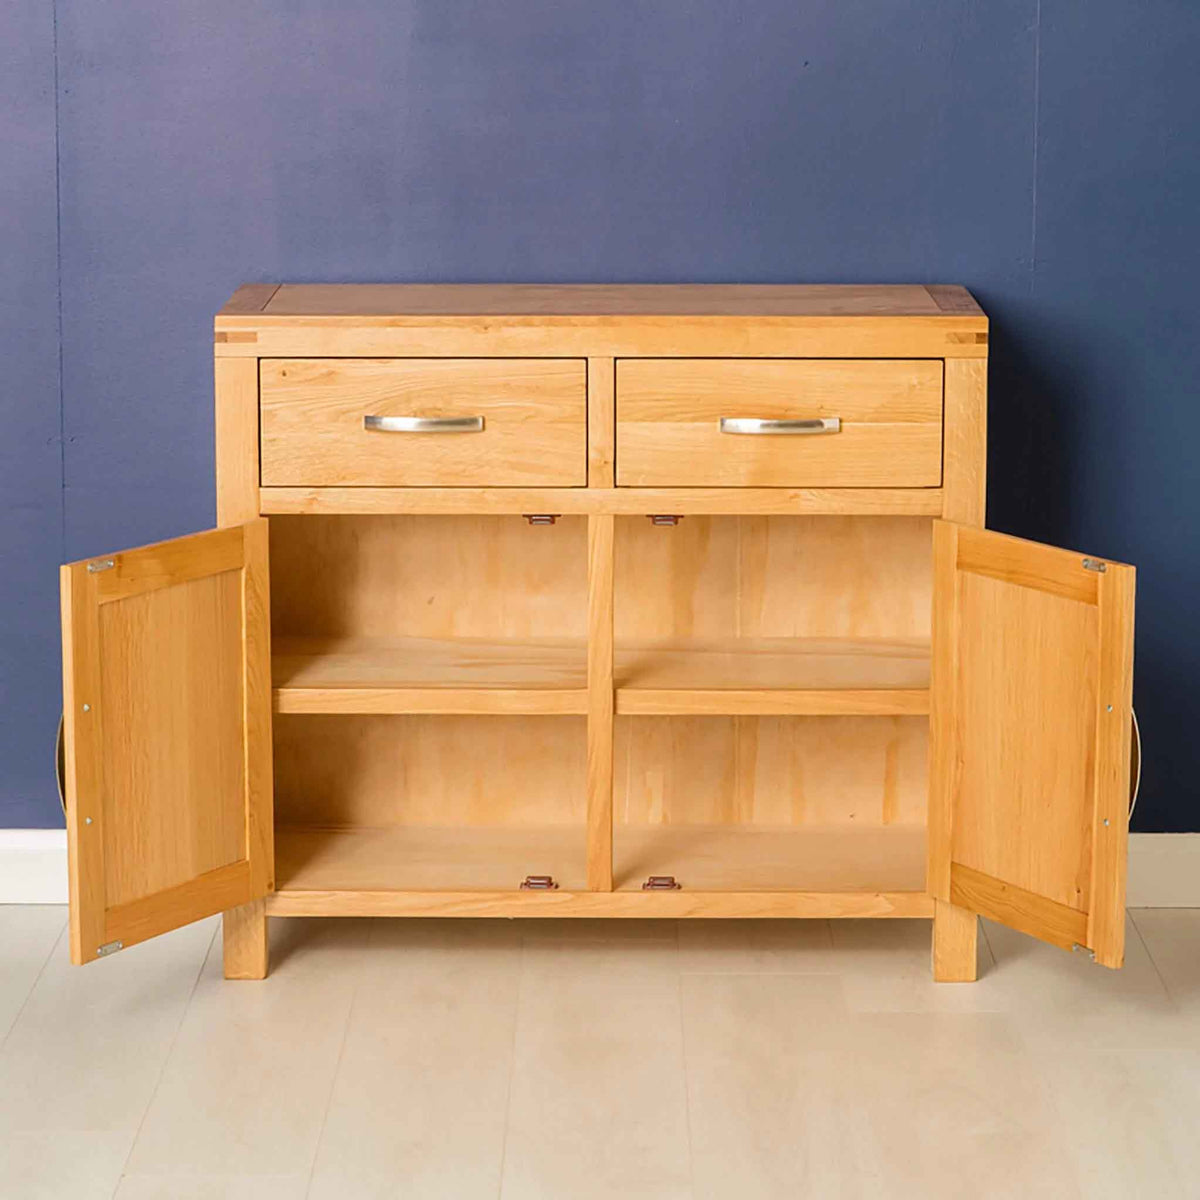 Inside view of the Abbey Light Oak Small Wooden Sideboard Cupboard - Lifestyle with doors open